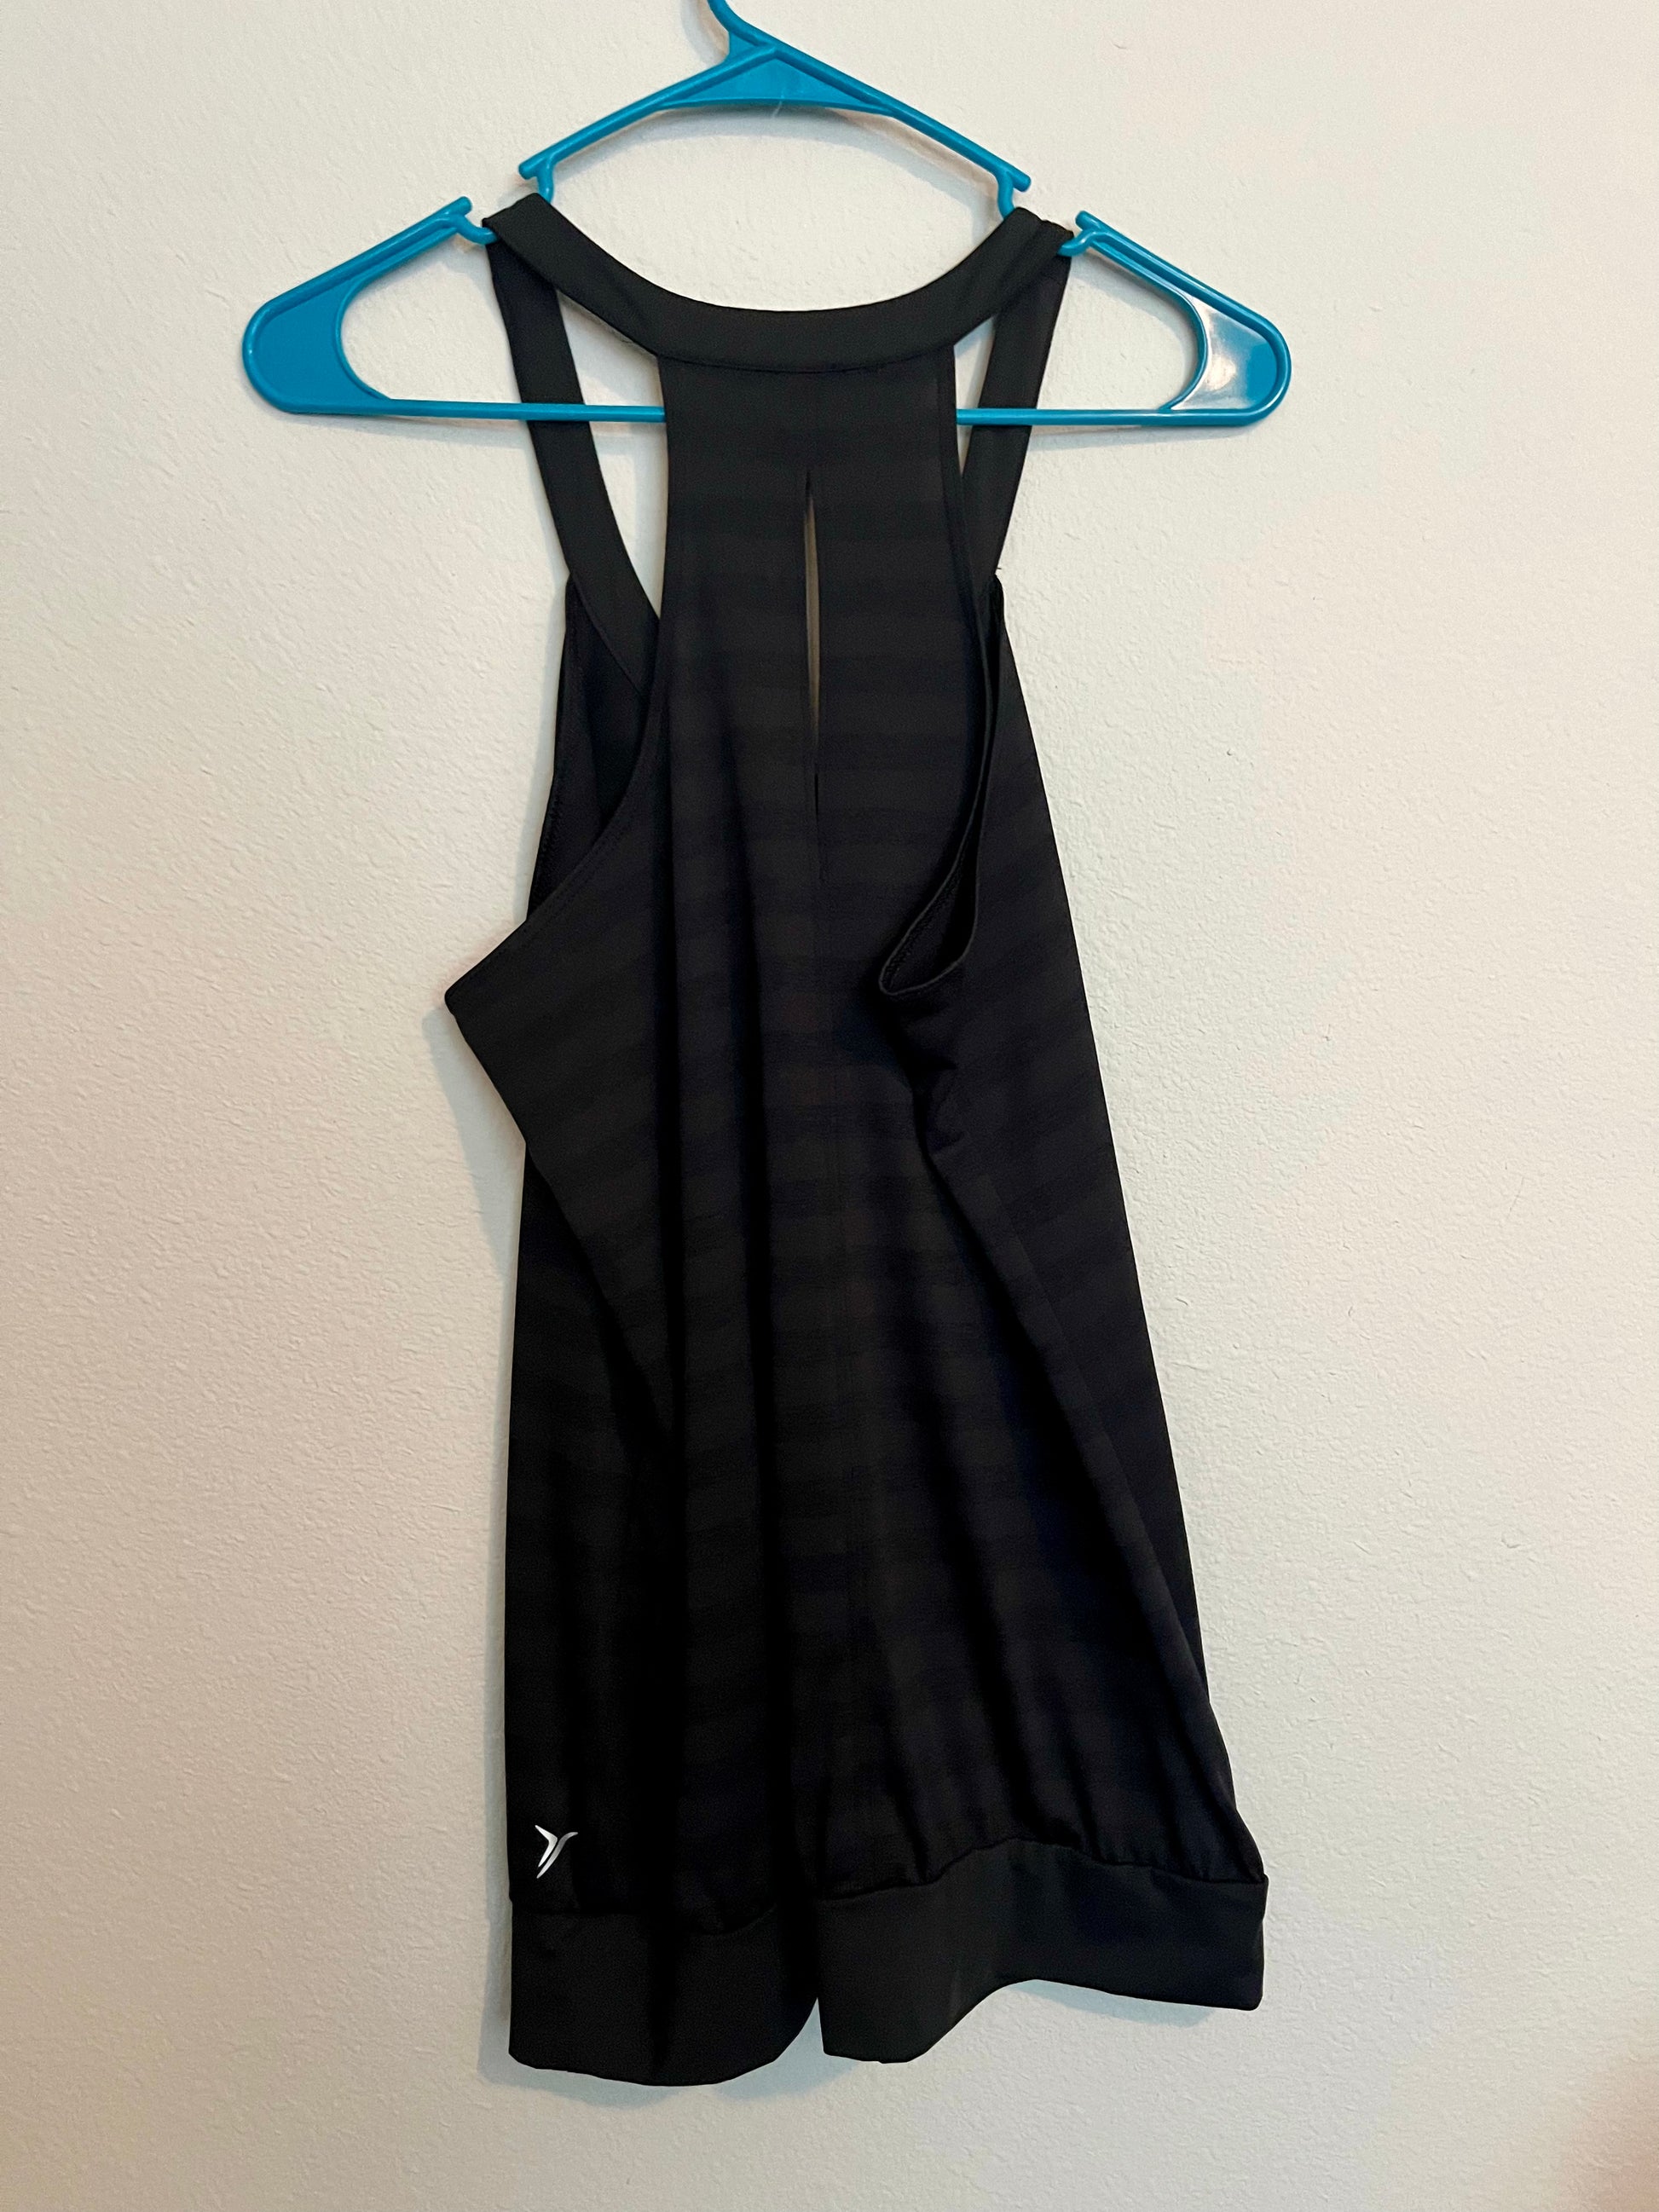 Old Navy Active Athletic Top, Size Medium - Tales from the Tangle